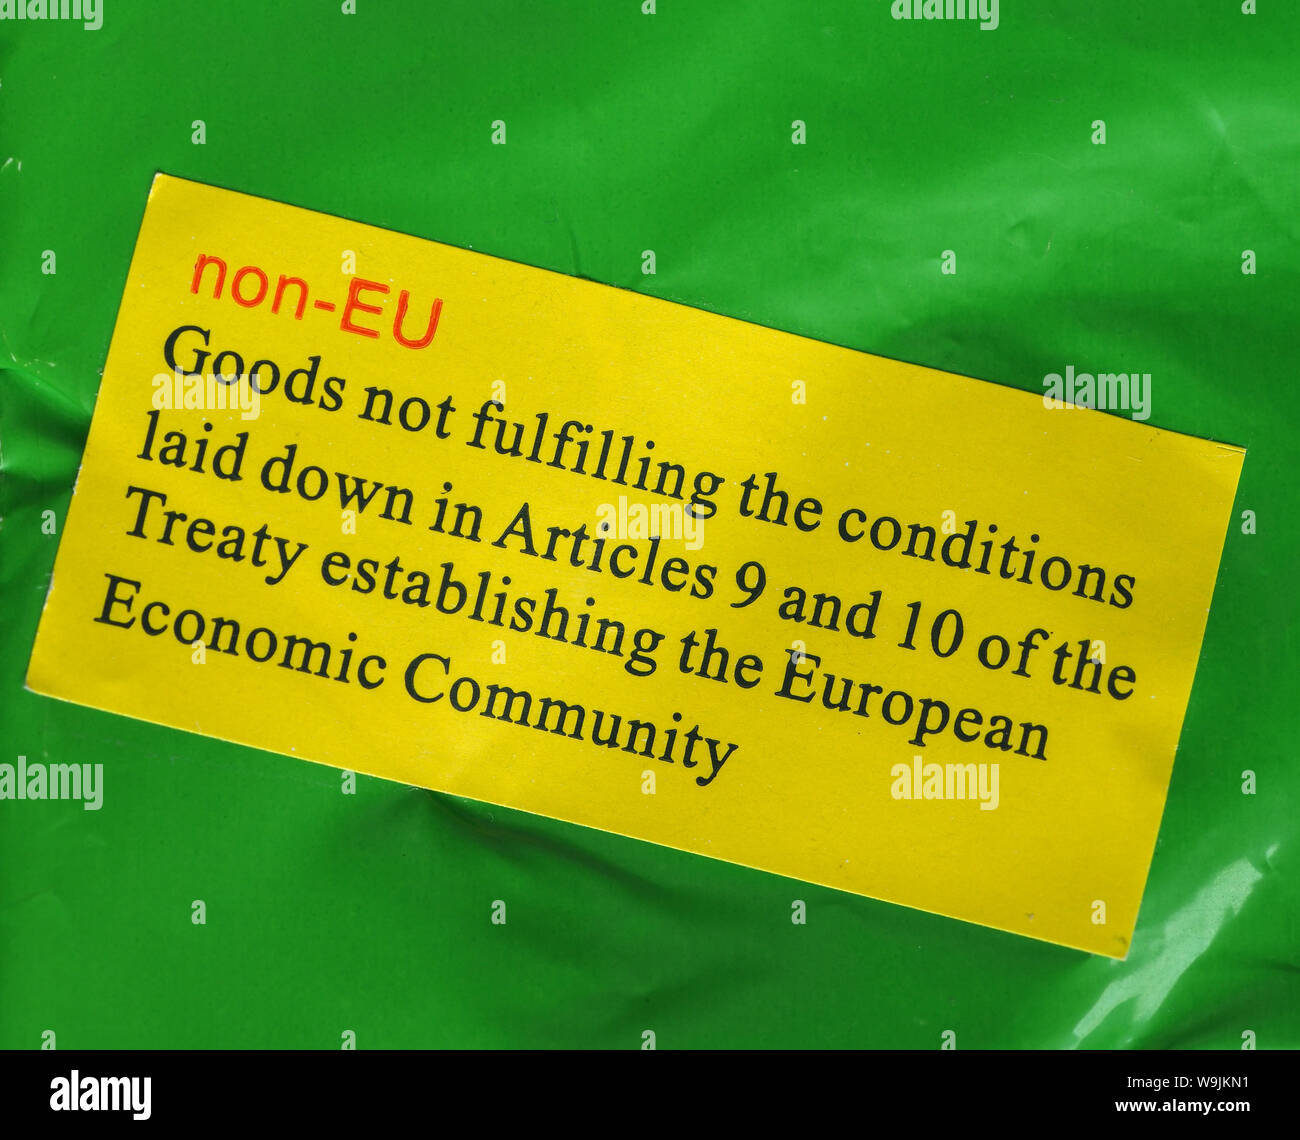 non eu label for goods not foreign fullfilling the conditions of articles 9 and 10 of EEC treaty Stock Photo